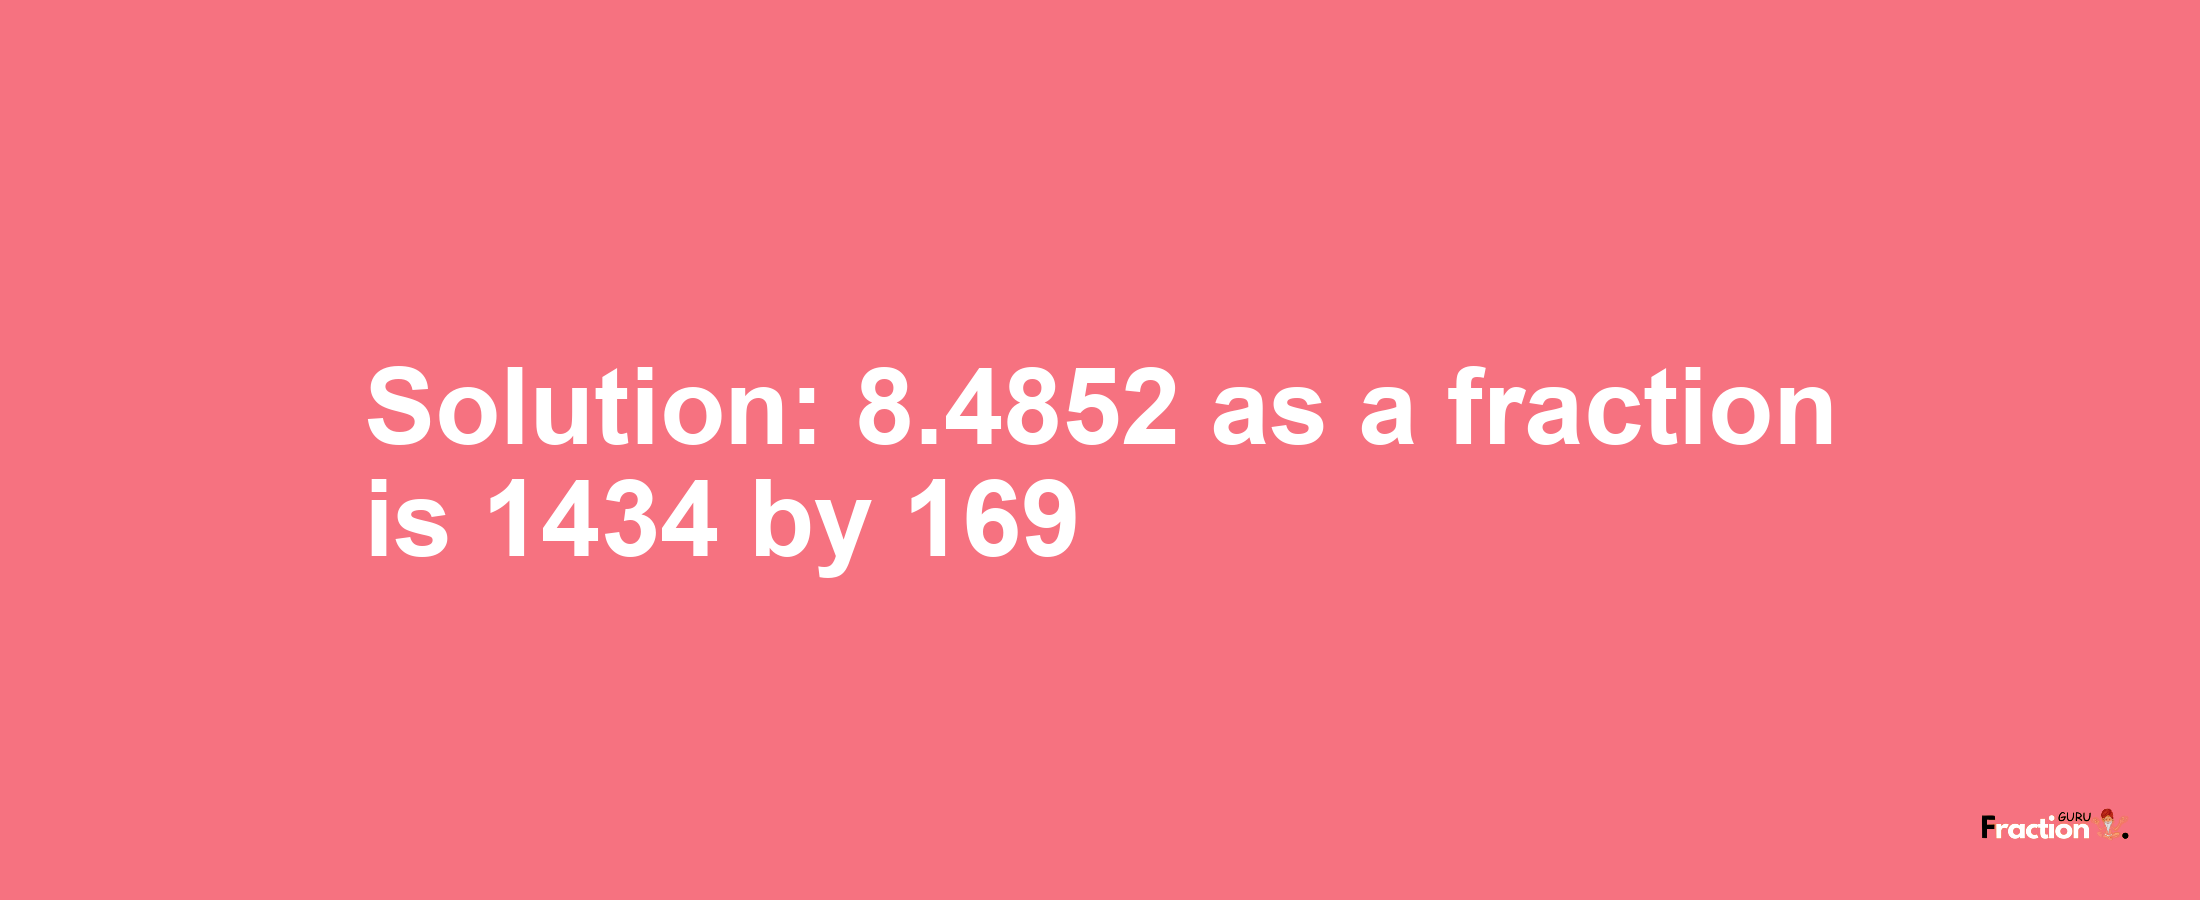 Solution:8.4852 as a fraction is 1434/169